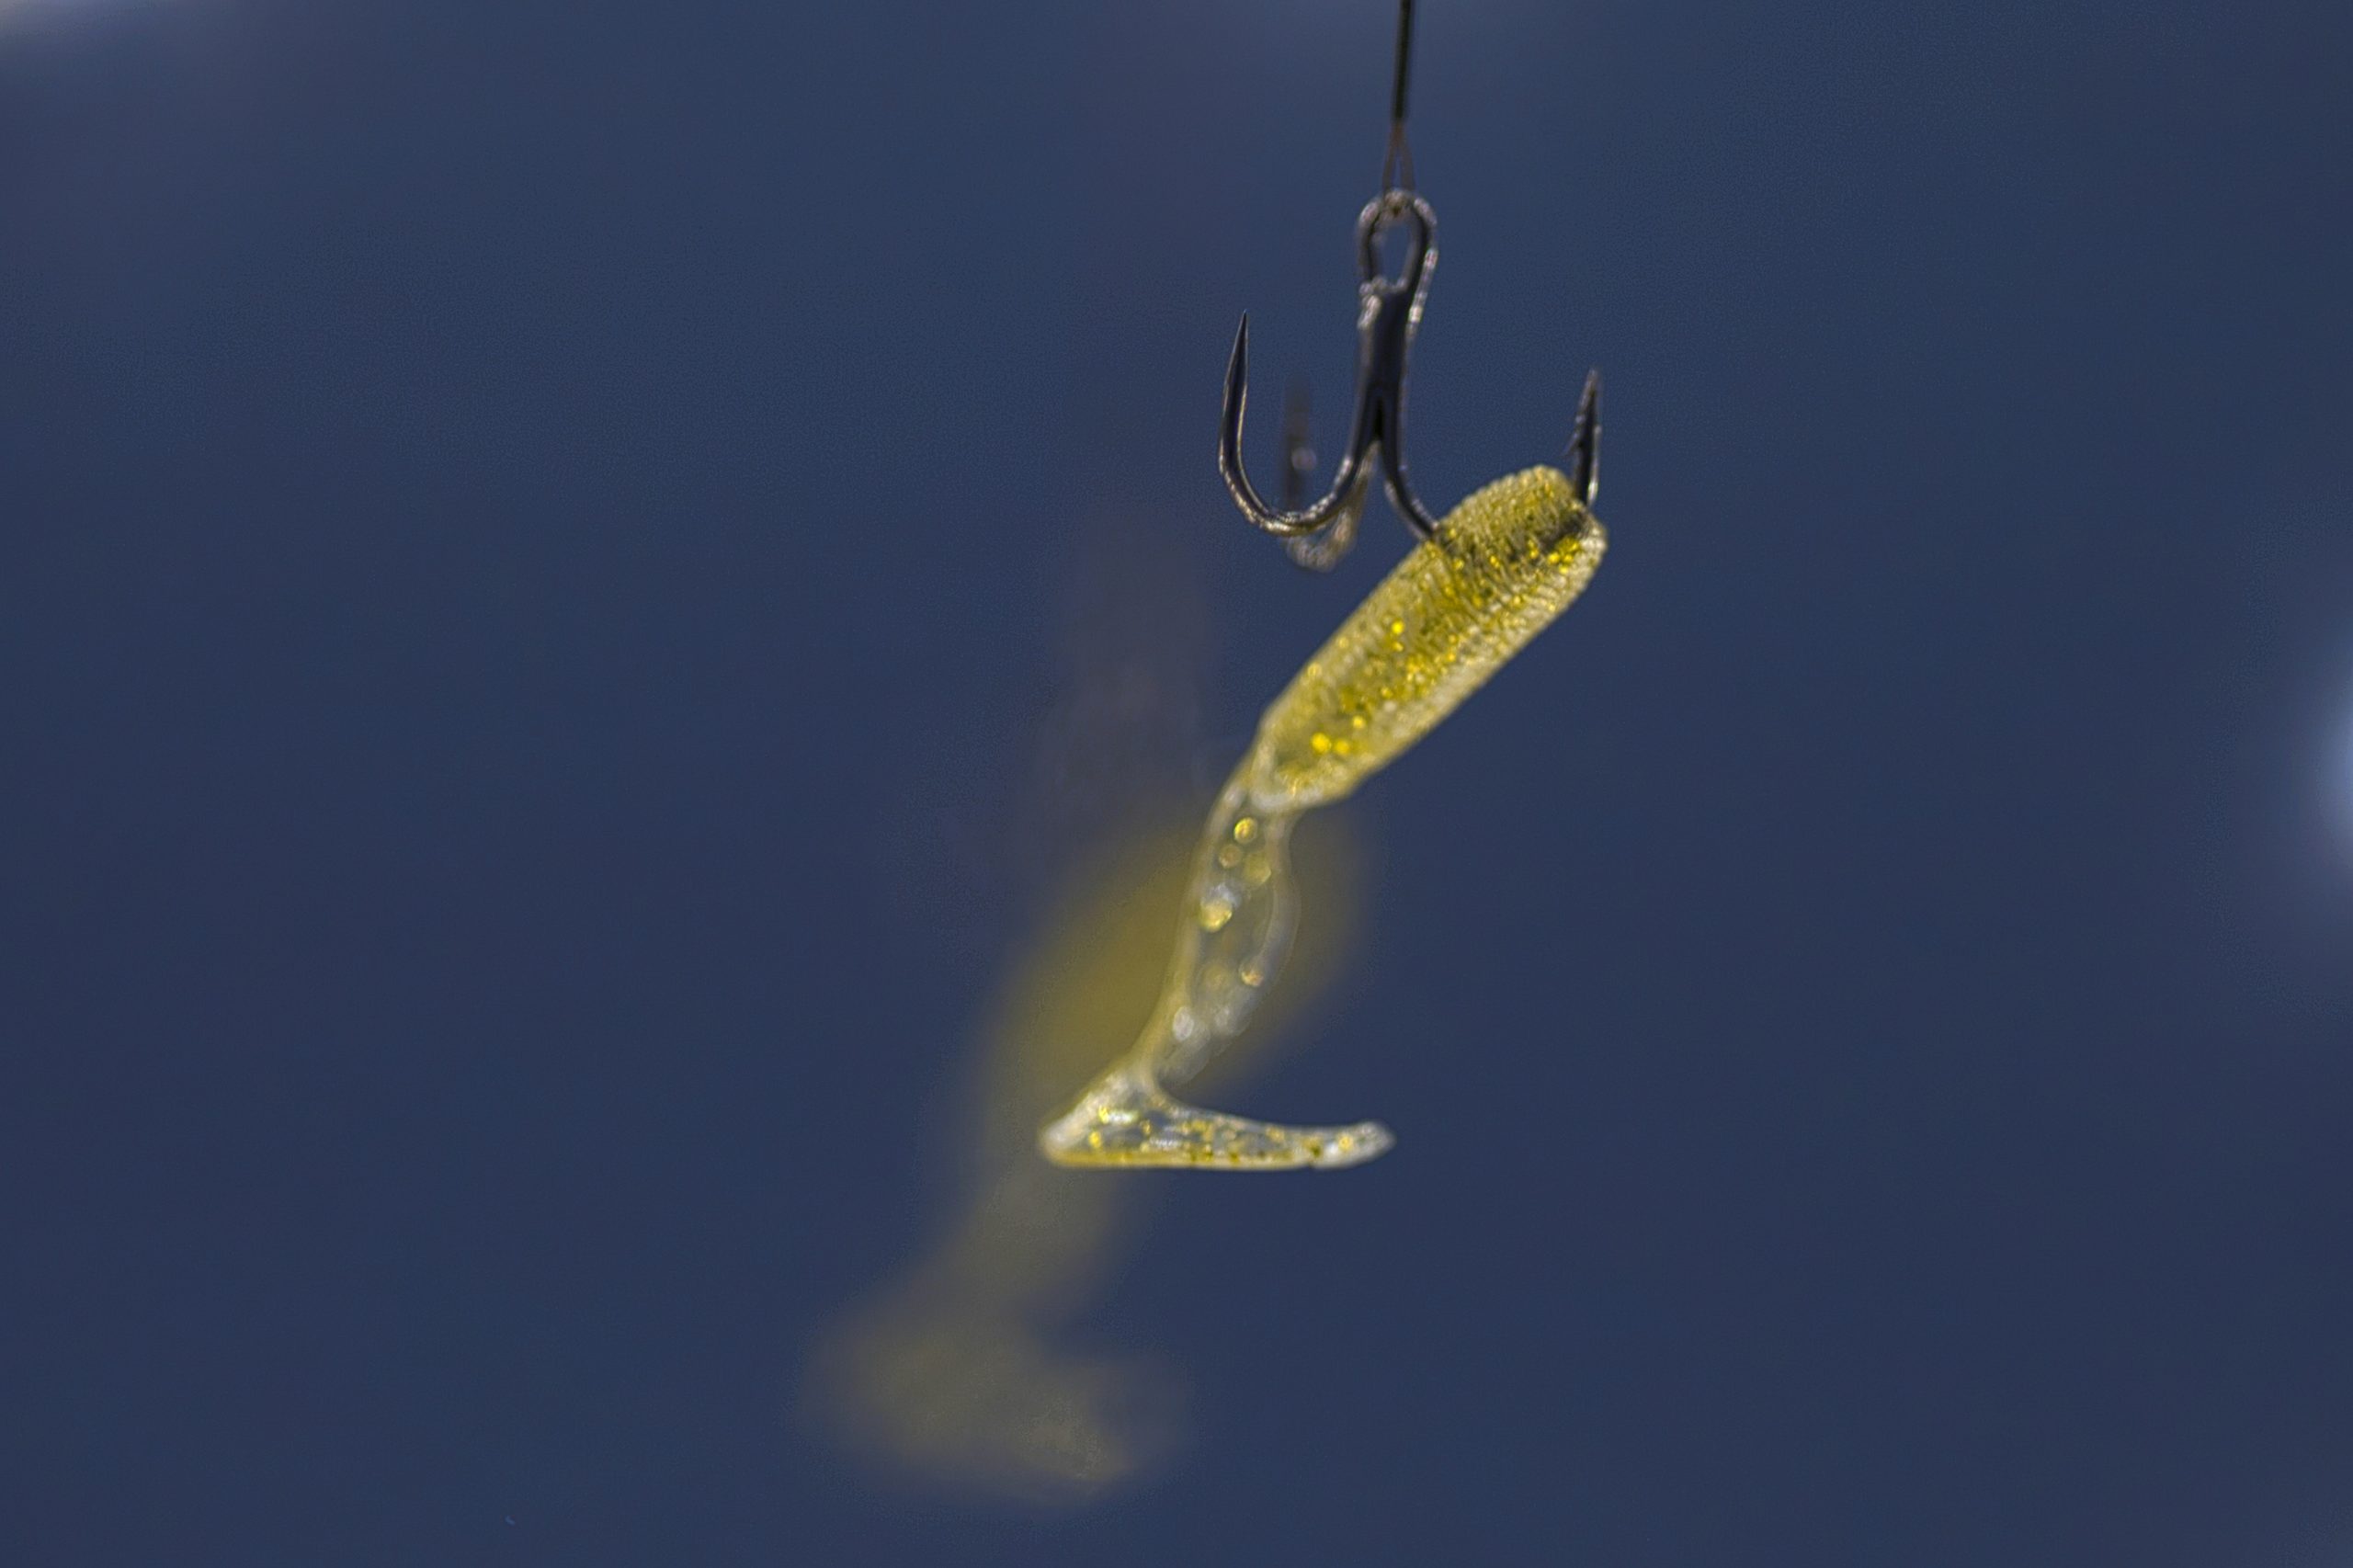 a fishing hook and lure bobbing in water to attract a victim